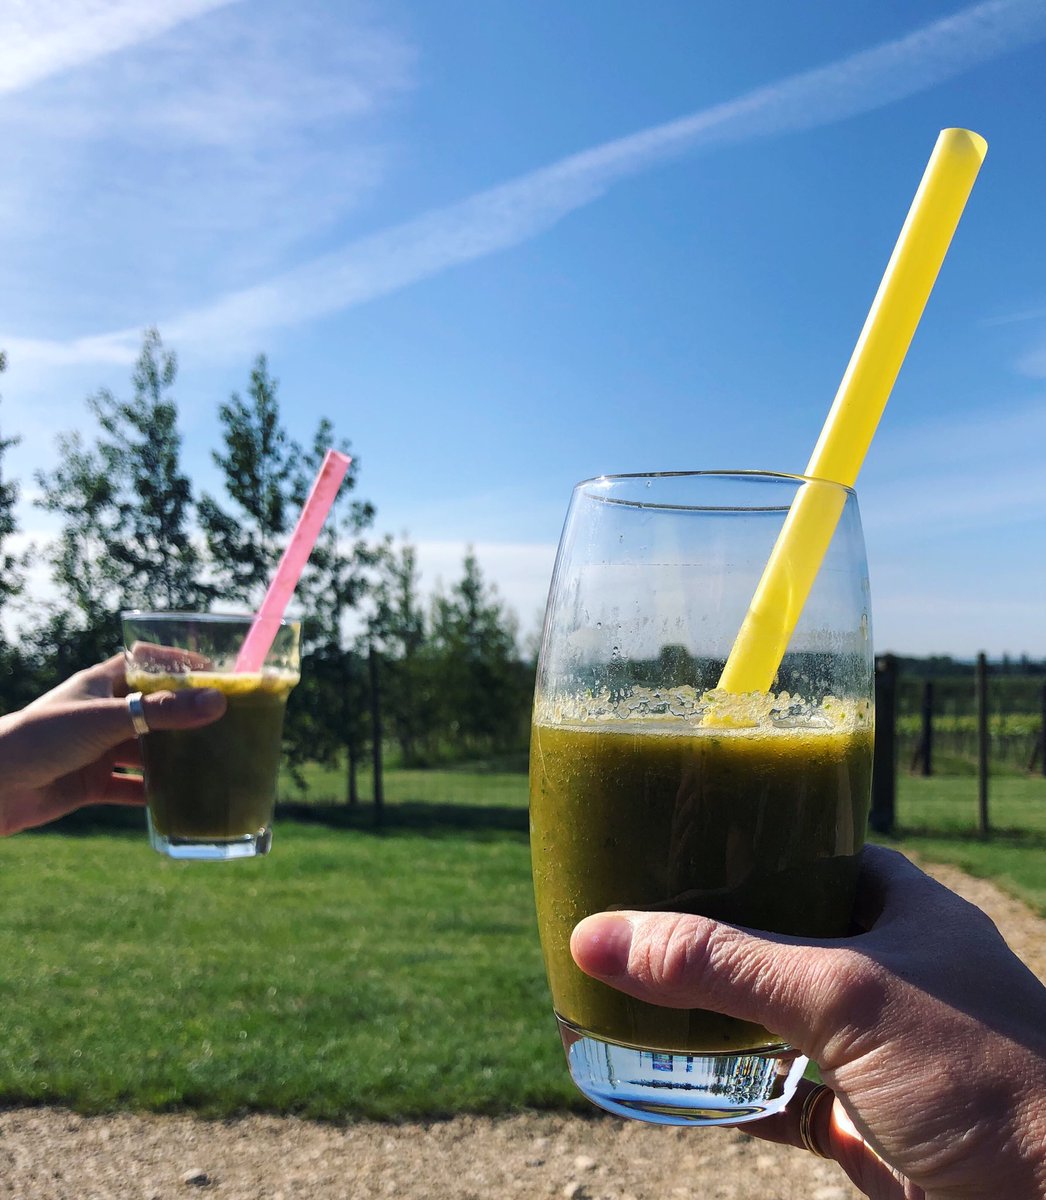 ☀️ It’s HOT!! ☀️Taking a much needed break. Exciting news coming soon...
#thinklocaldrinklocal #supportlocal #InThisTogetherGlos #smoothie #hydrate #supportlocalproduce